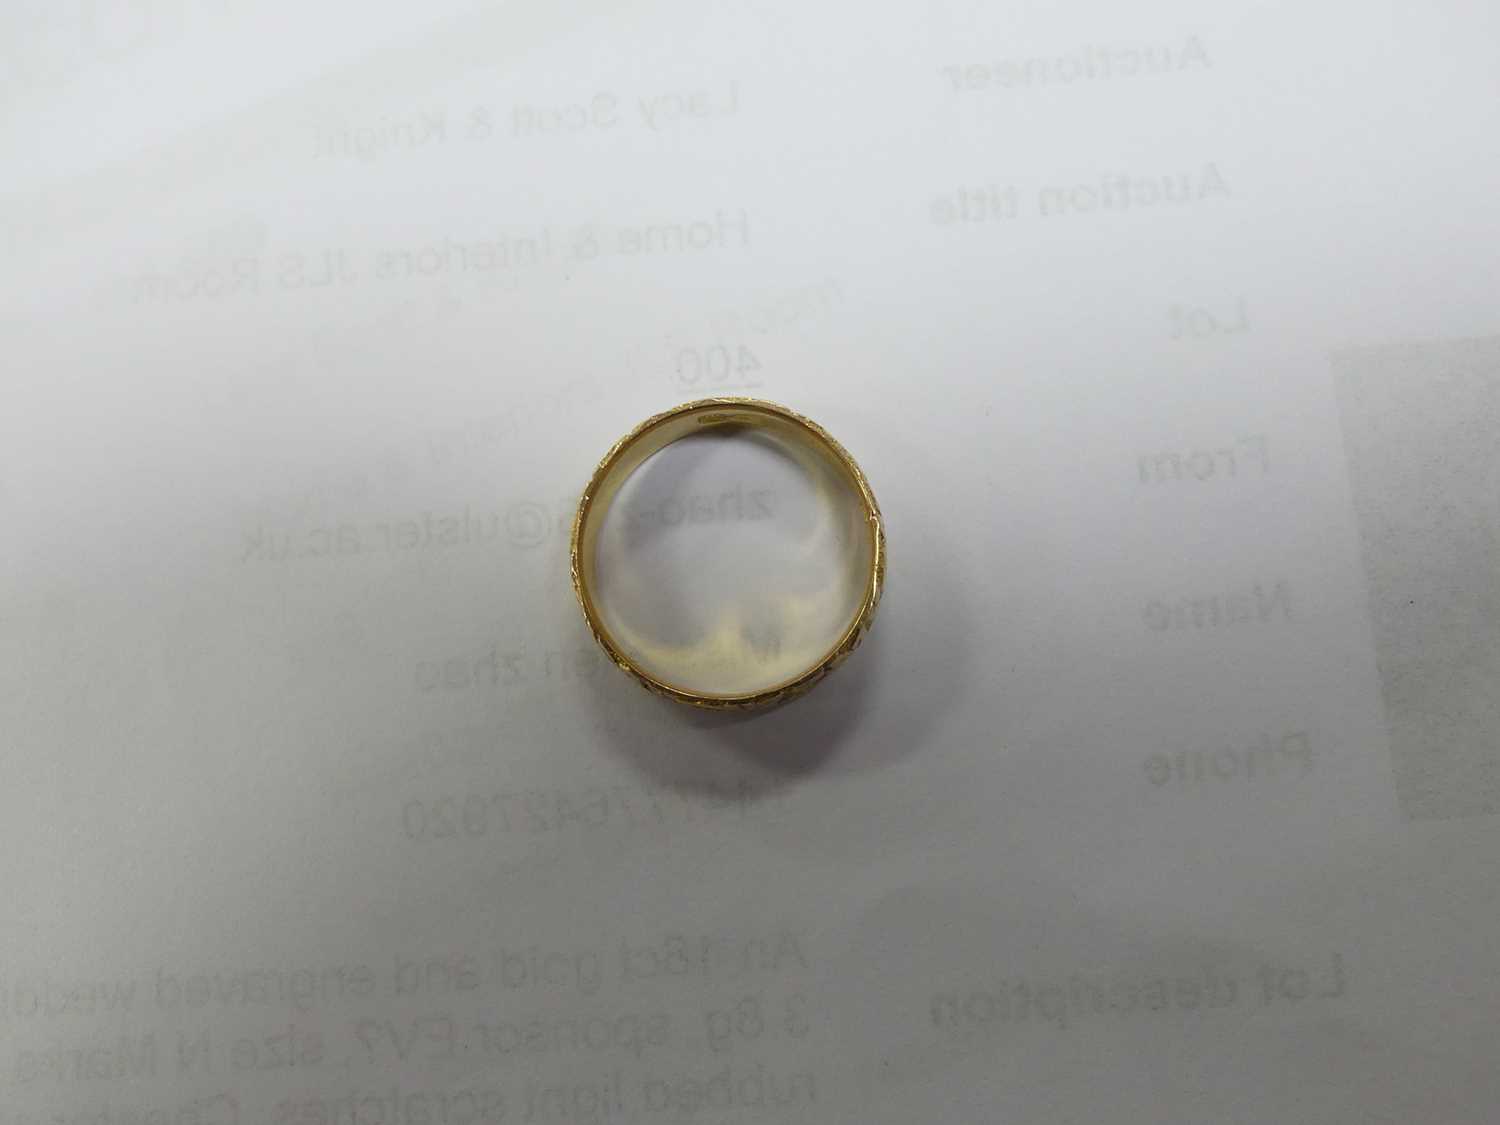 An 18ct gold and engraved wedding band, 3.8g, sponsor EV?, size N Marks a bit rubbed,light - Image 5 of 5